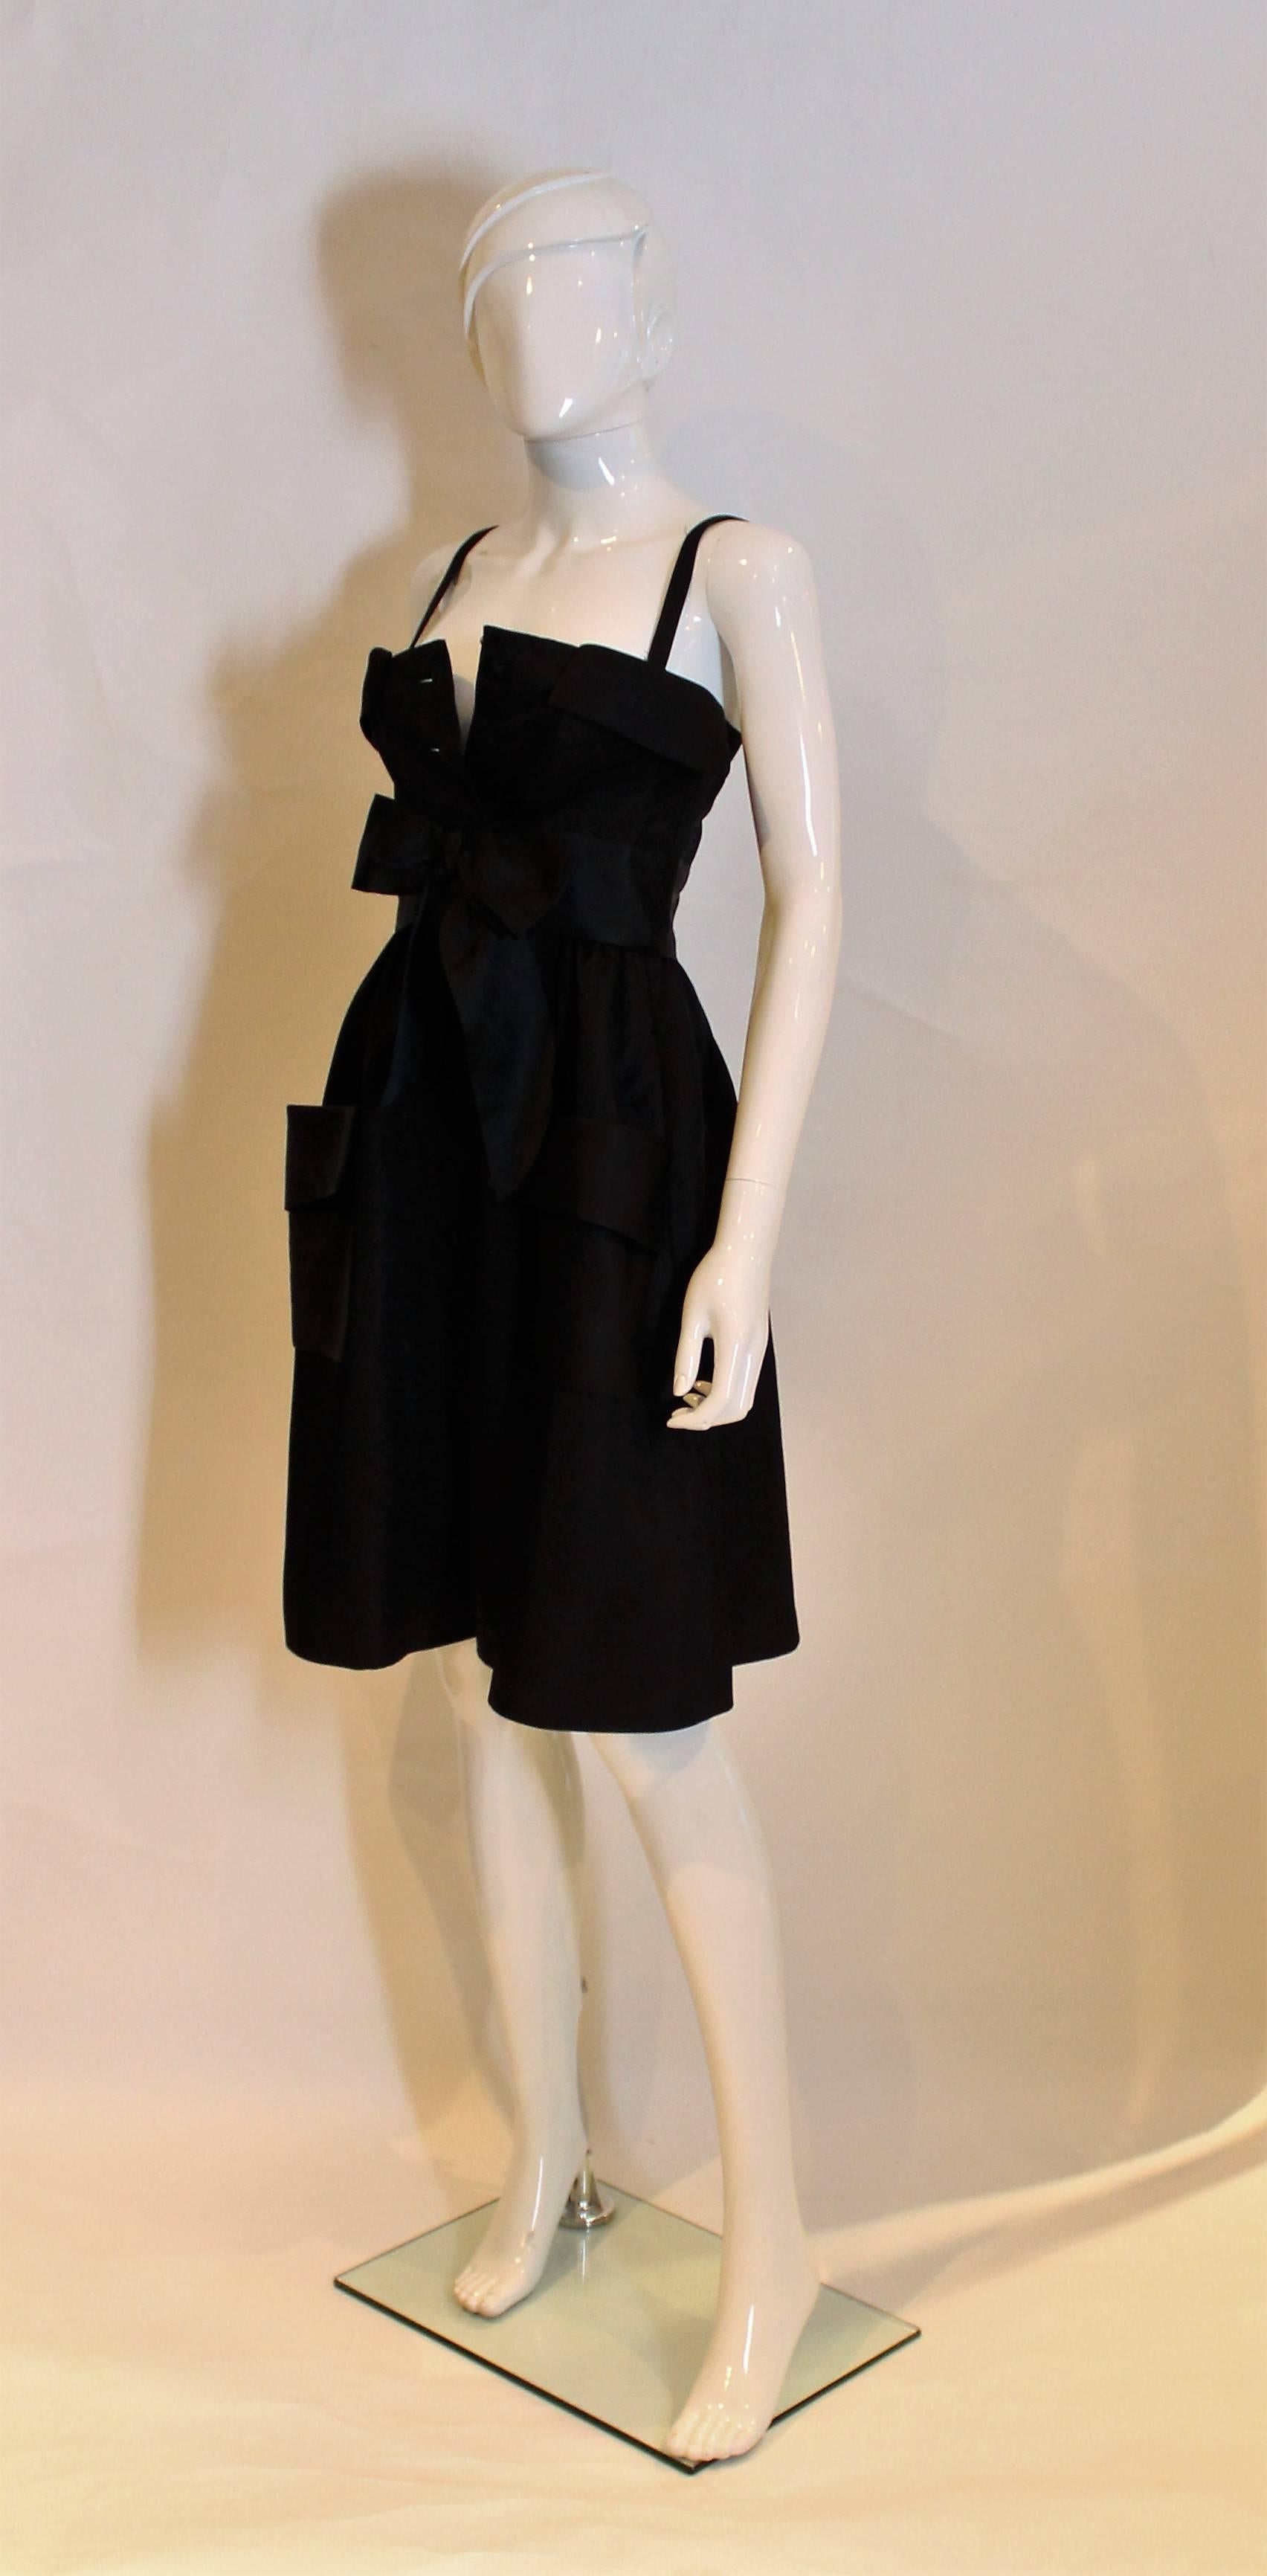 A delightful  little black dress by Geoffrey Beene. The dress has a fold over top on the bodice, 8 button front opening, bow at the waist and two pockets on the skirt front.